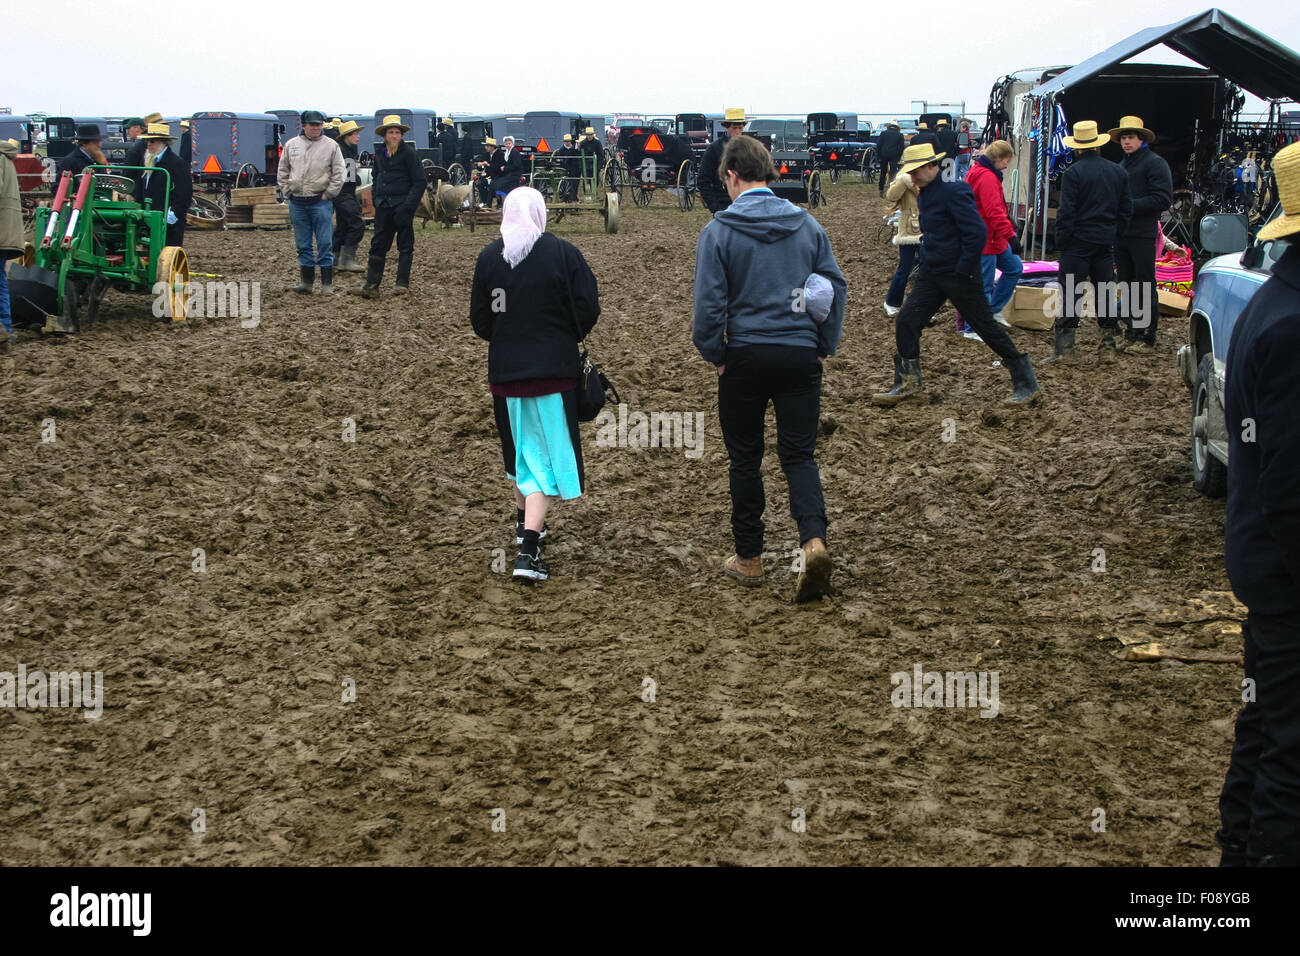 Muddy fields in late winter is why the public sales held by Lancaster County volunteer fire companies are called mud sales. Stock Photo